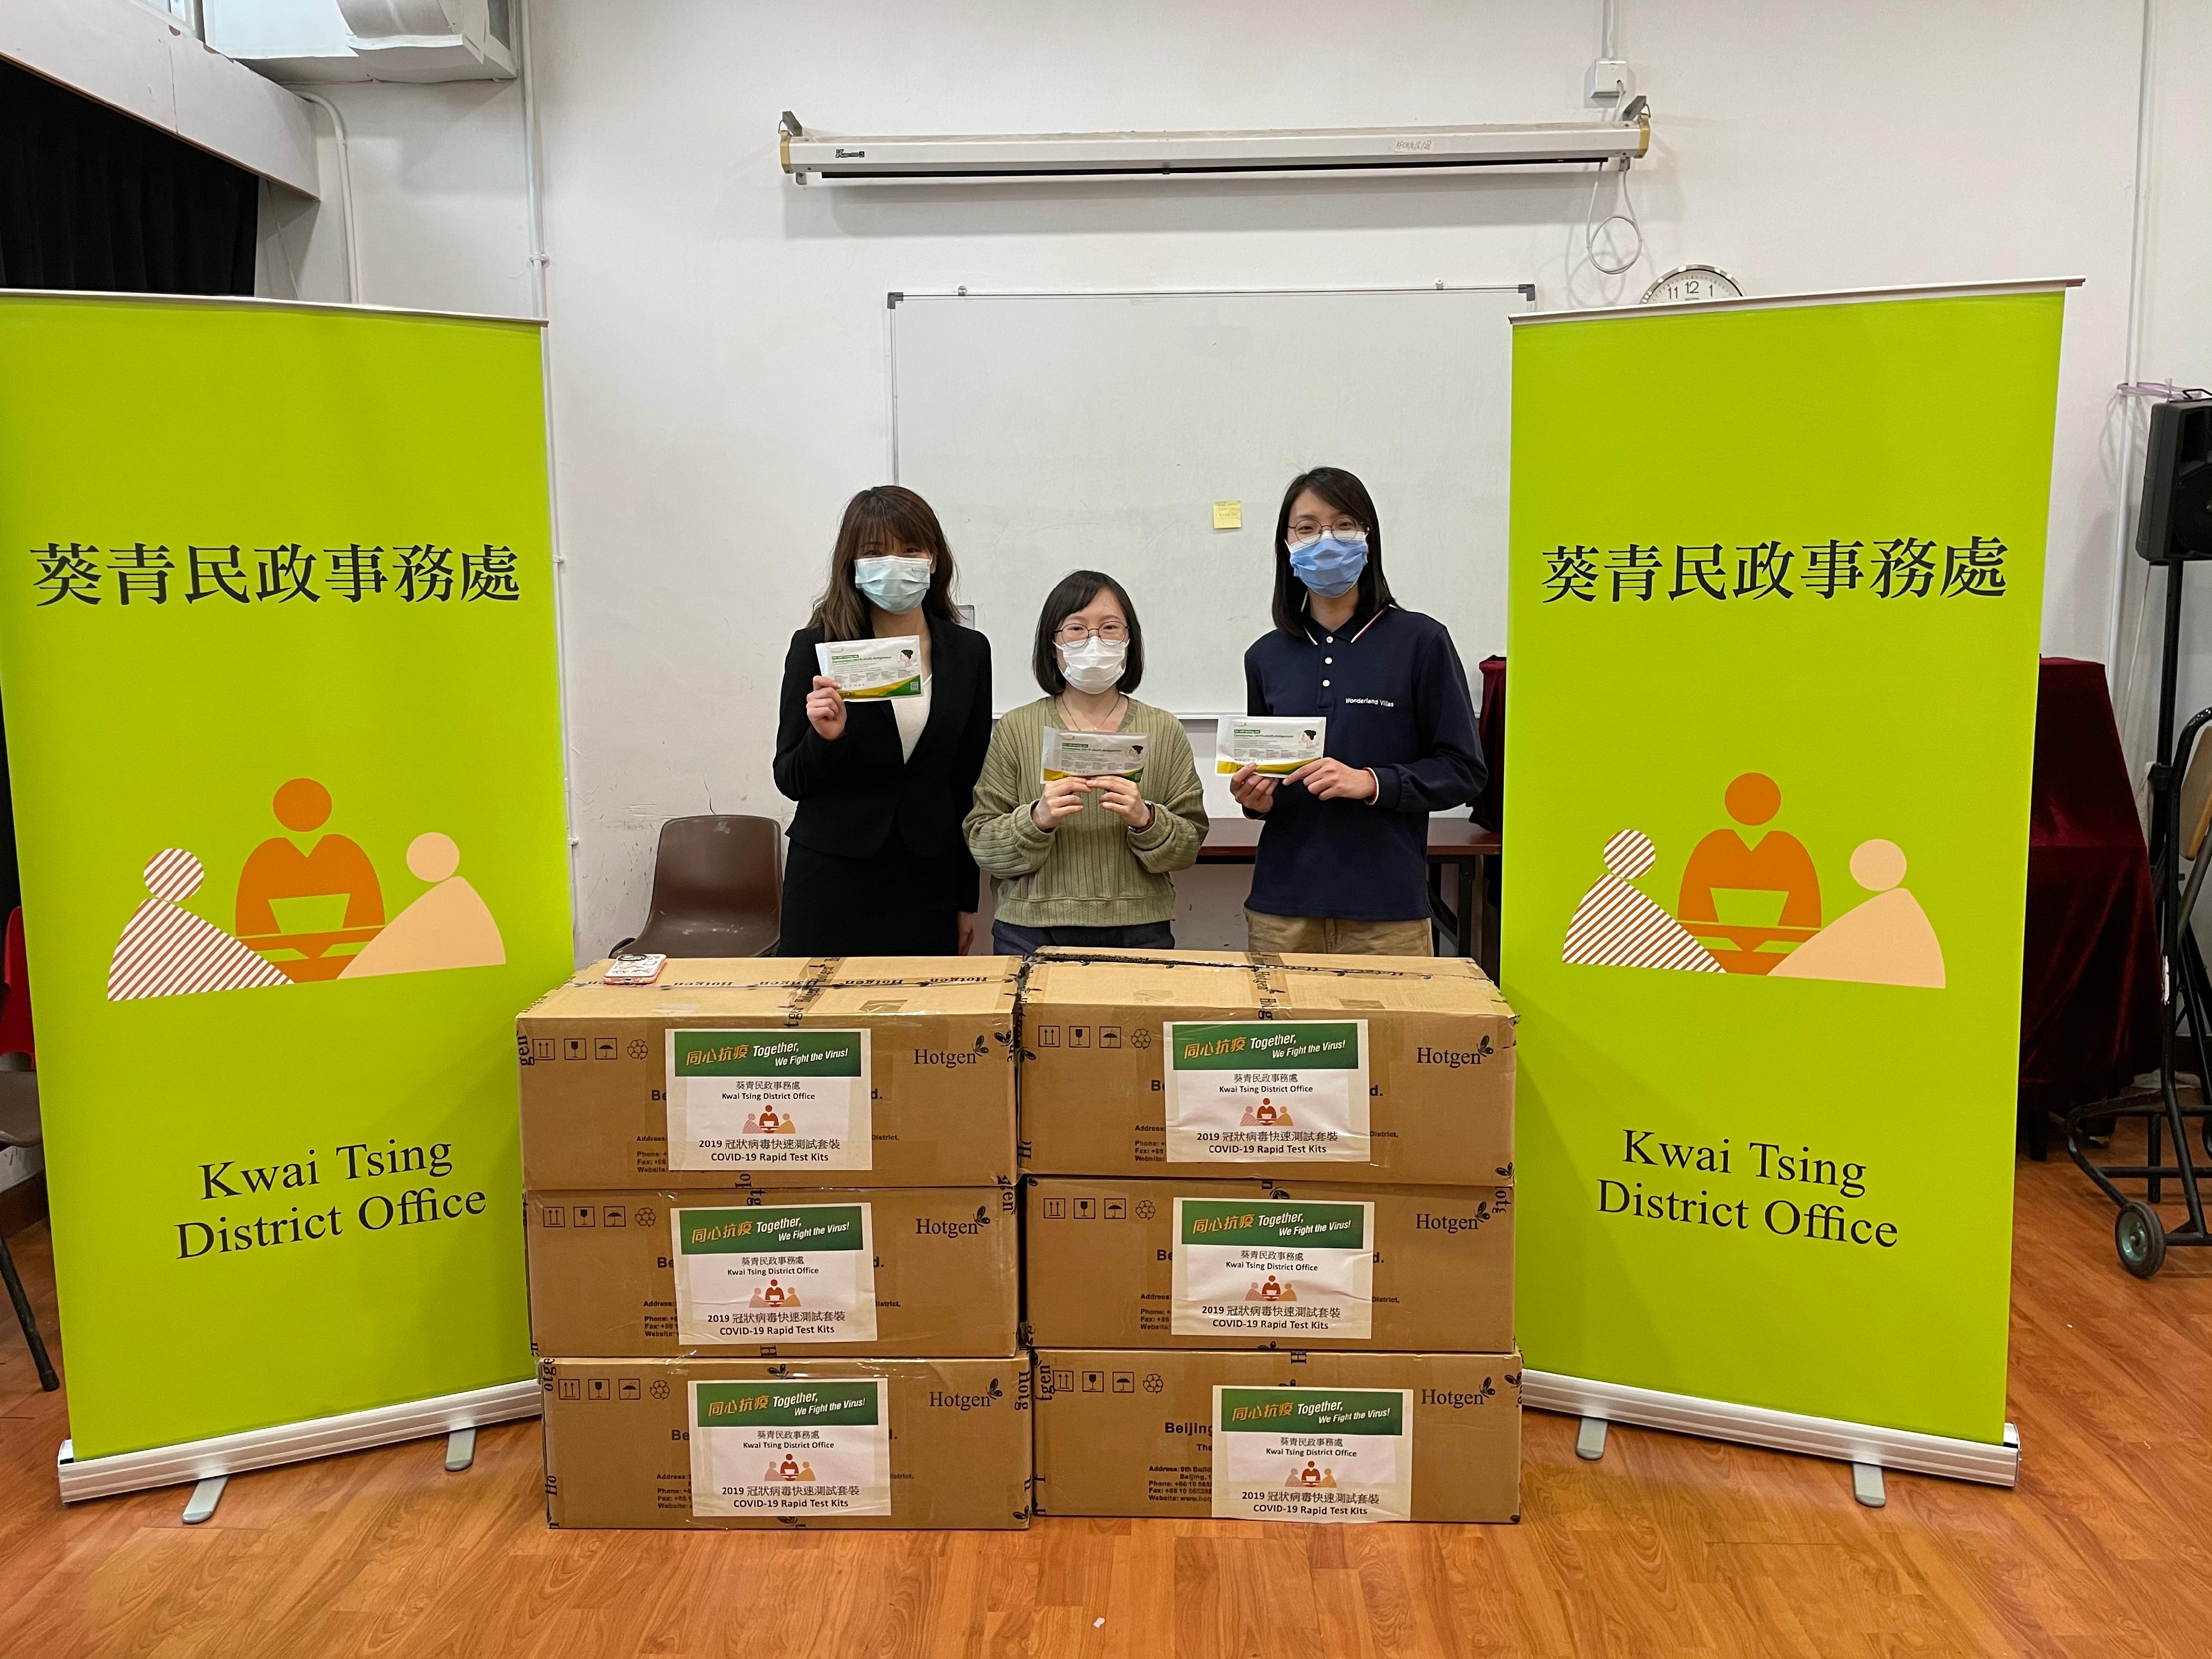 The Kwai Tsing District Office today (April 23) distributed COVID-19 rapid test kits to households, cleansing workers and property management staff living and working in Wonderland Villas for voluntary testing through the property management company.